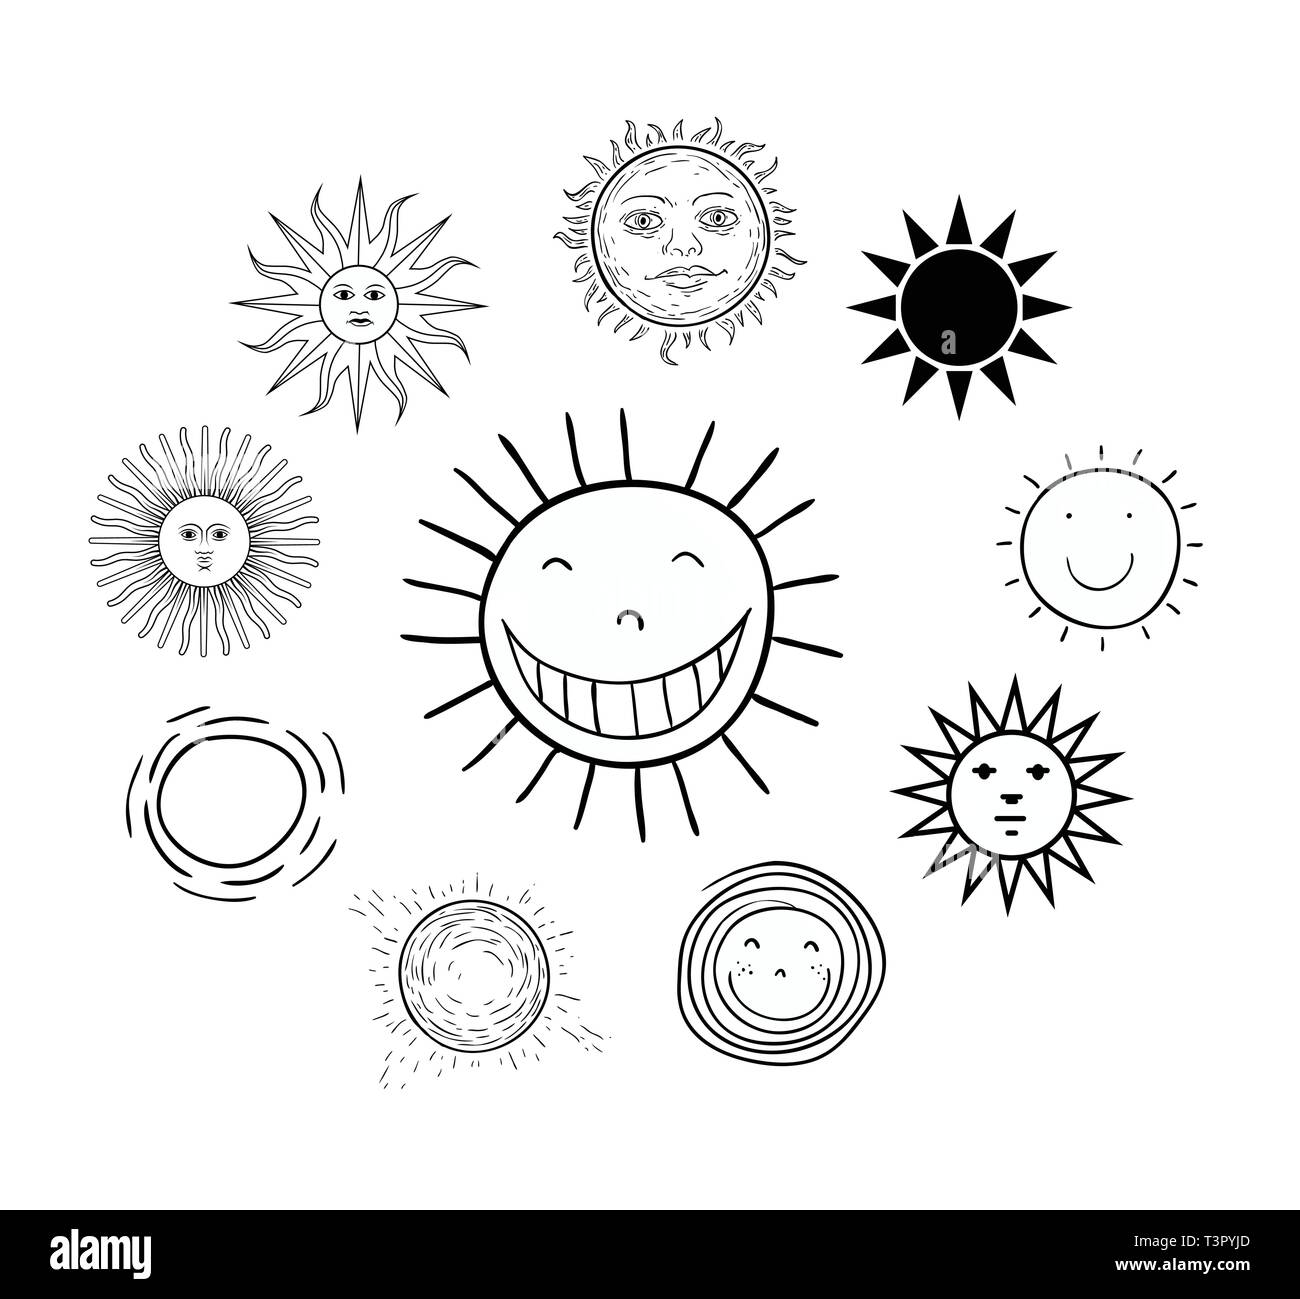 Set of sun icons isolated on white background. Vector illustration ...